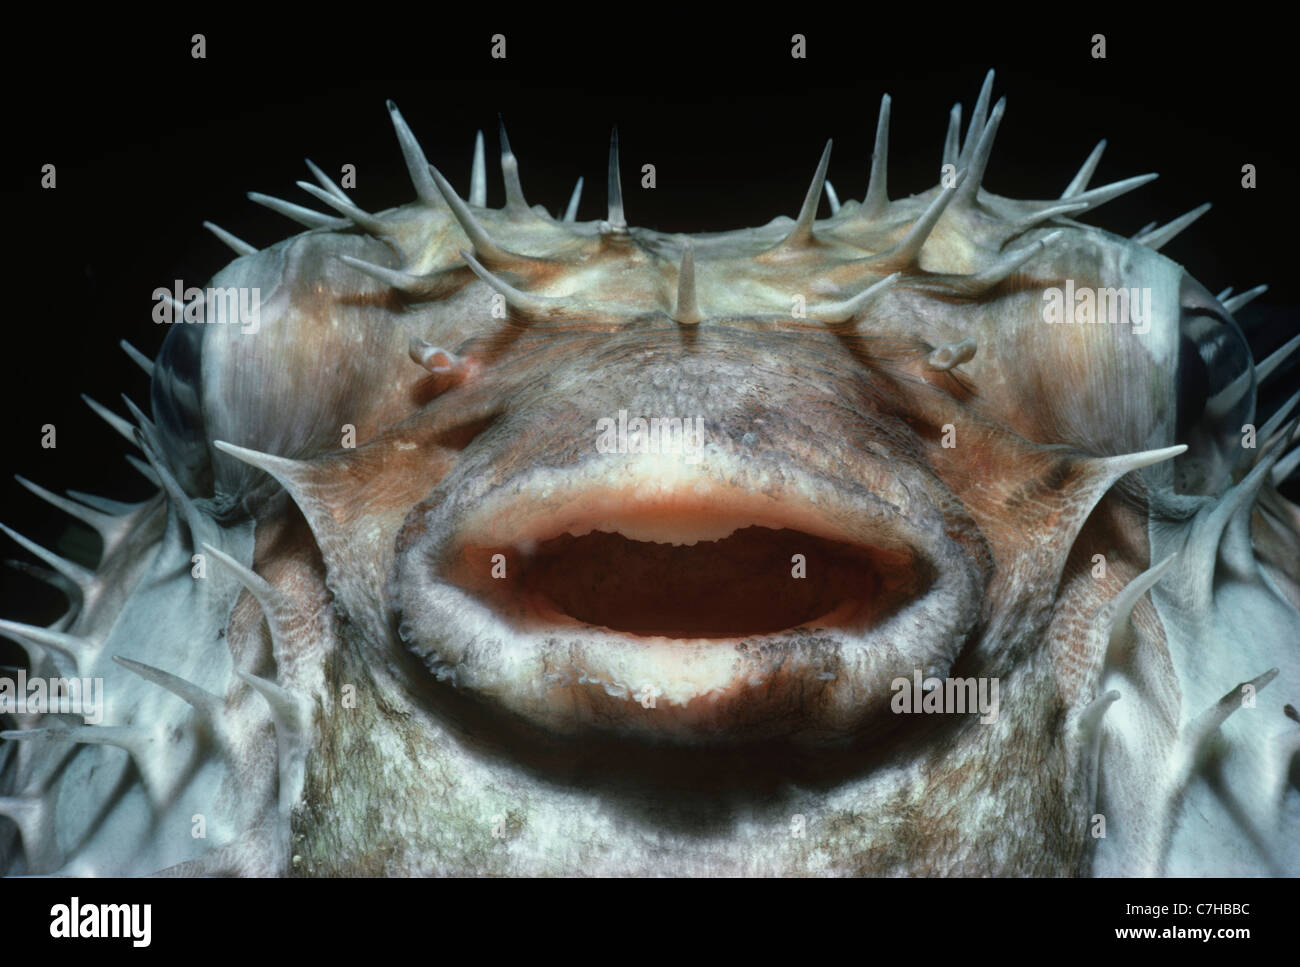 Face of a Blotched Pufferfish (Diodon liturosus) inflated with water at night as a defensive behavior Palau Islands, Micronesia Stock Photo